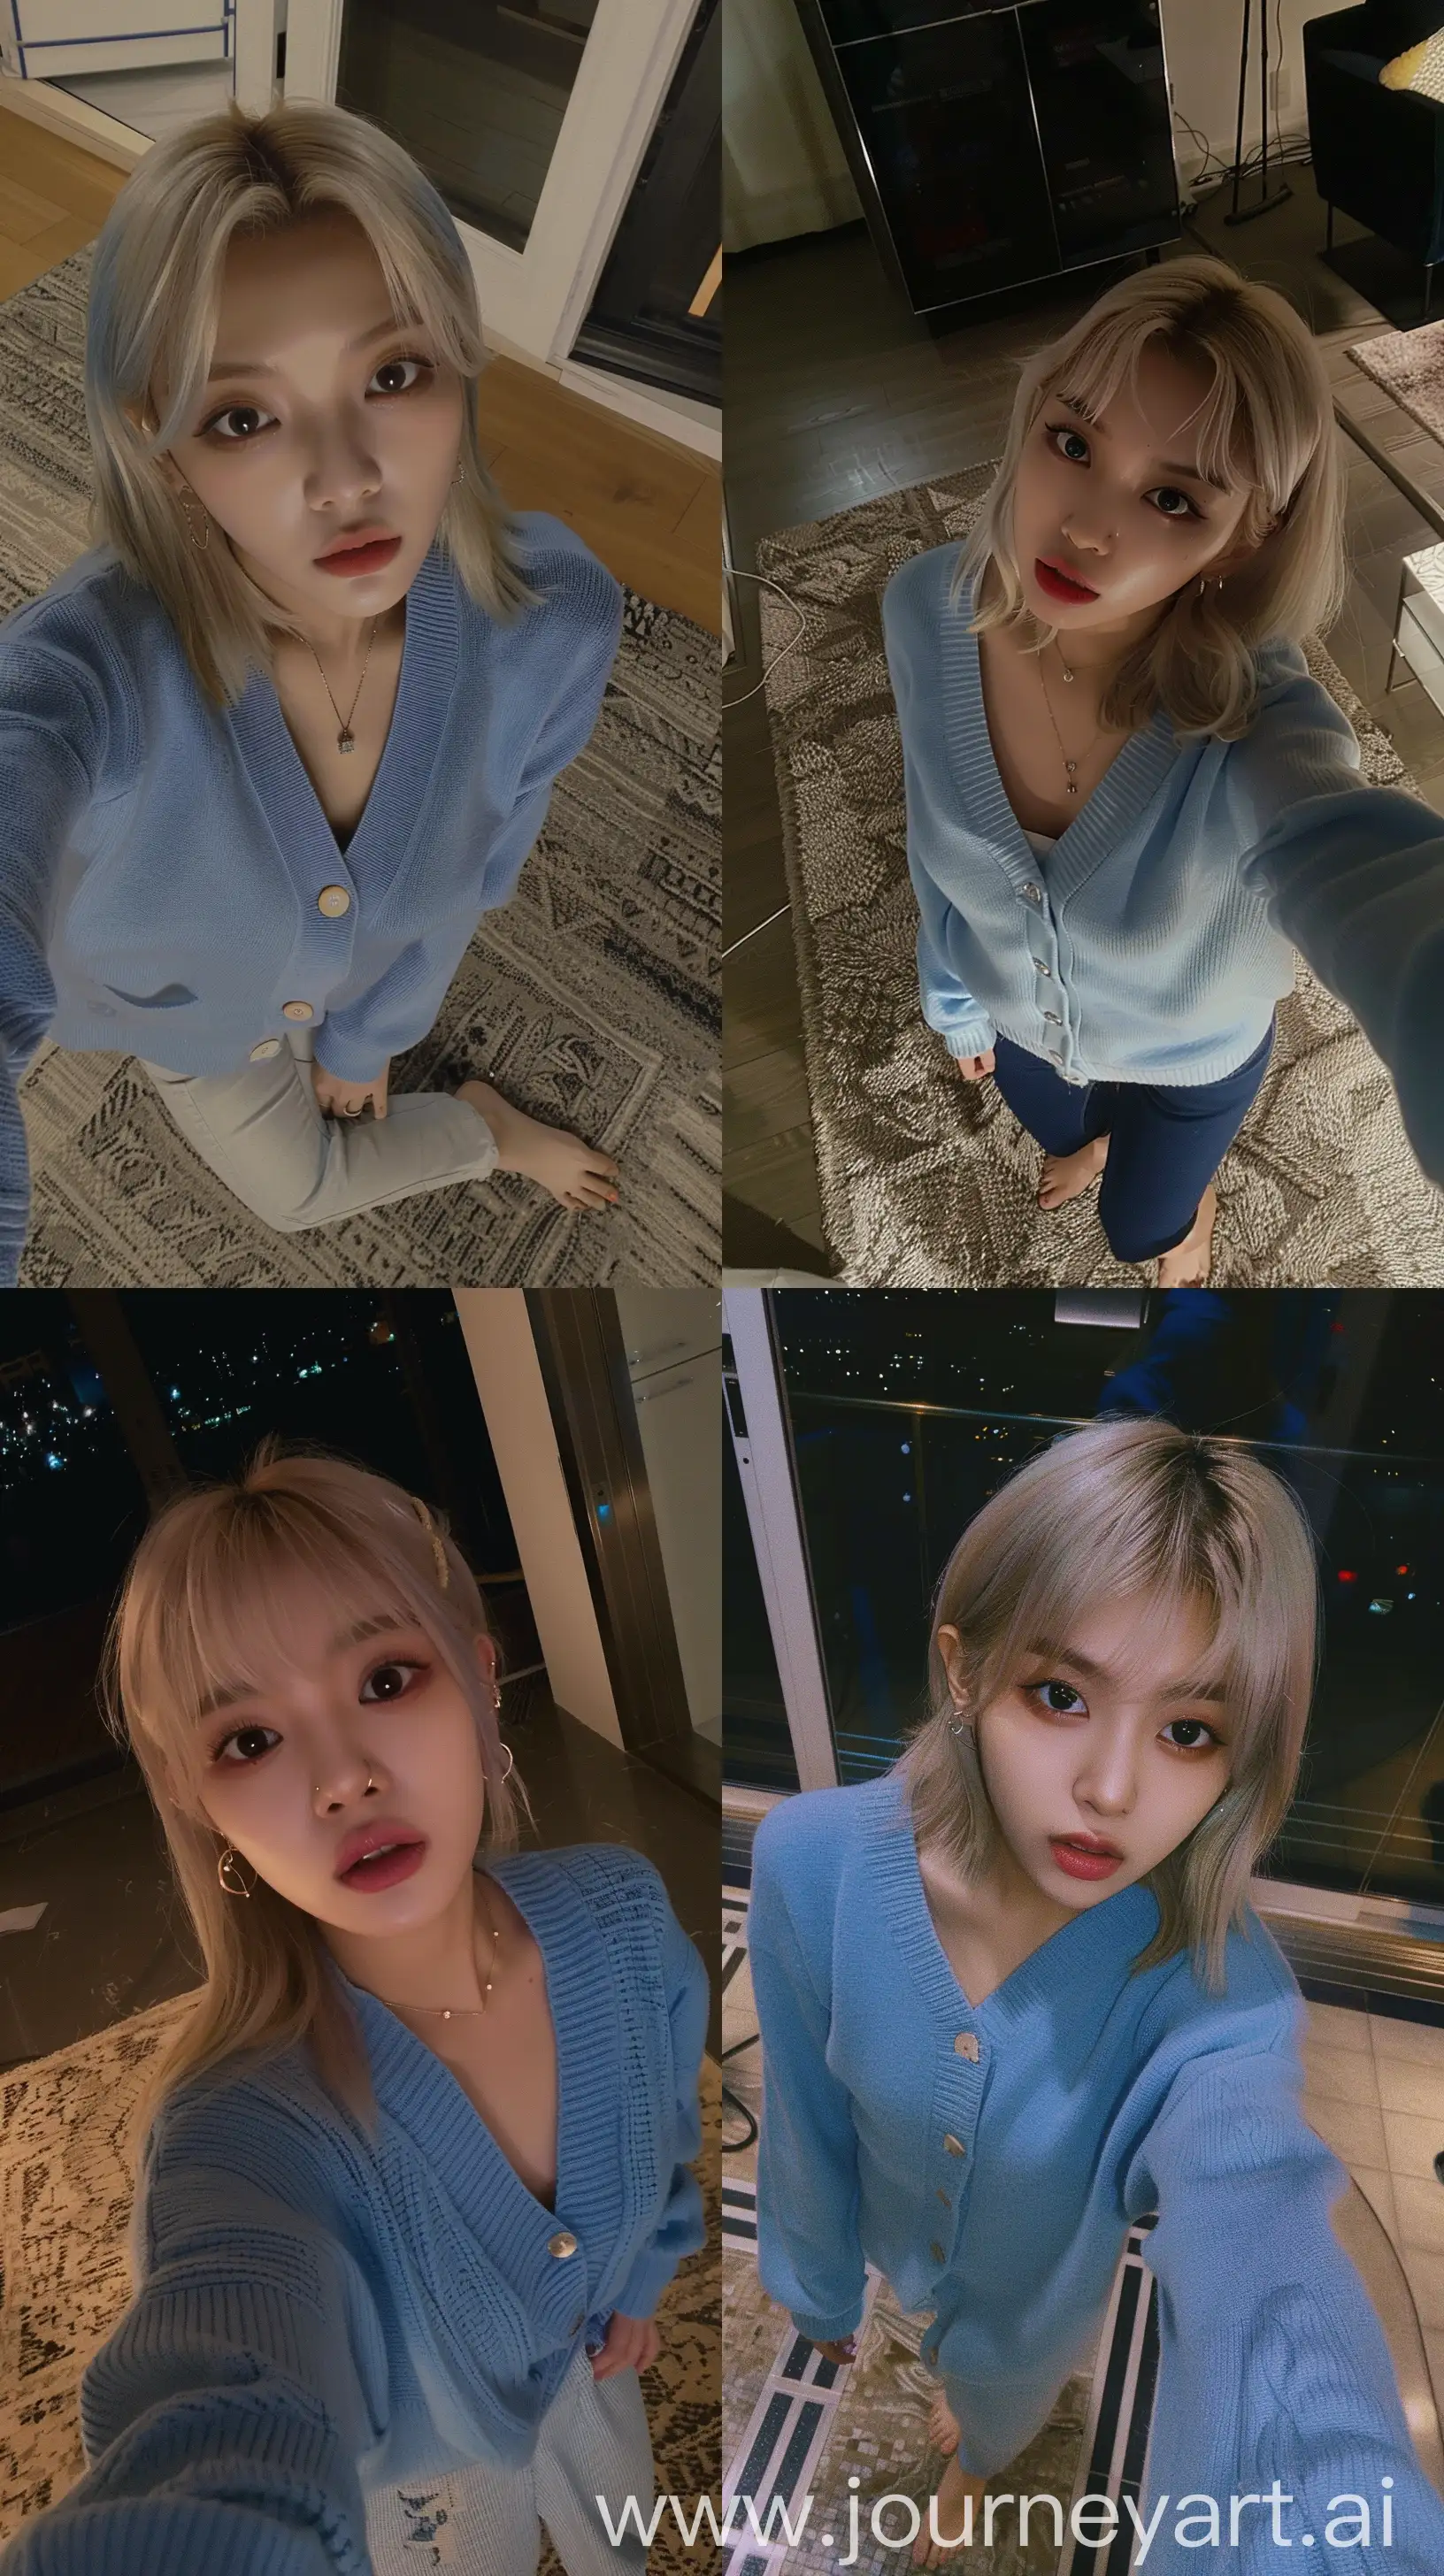 Jennies-Nighttime-Selfie-in-Soft-Blue-Cardigan-and-Blonde-Wolfcut-Hair